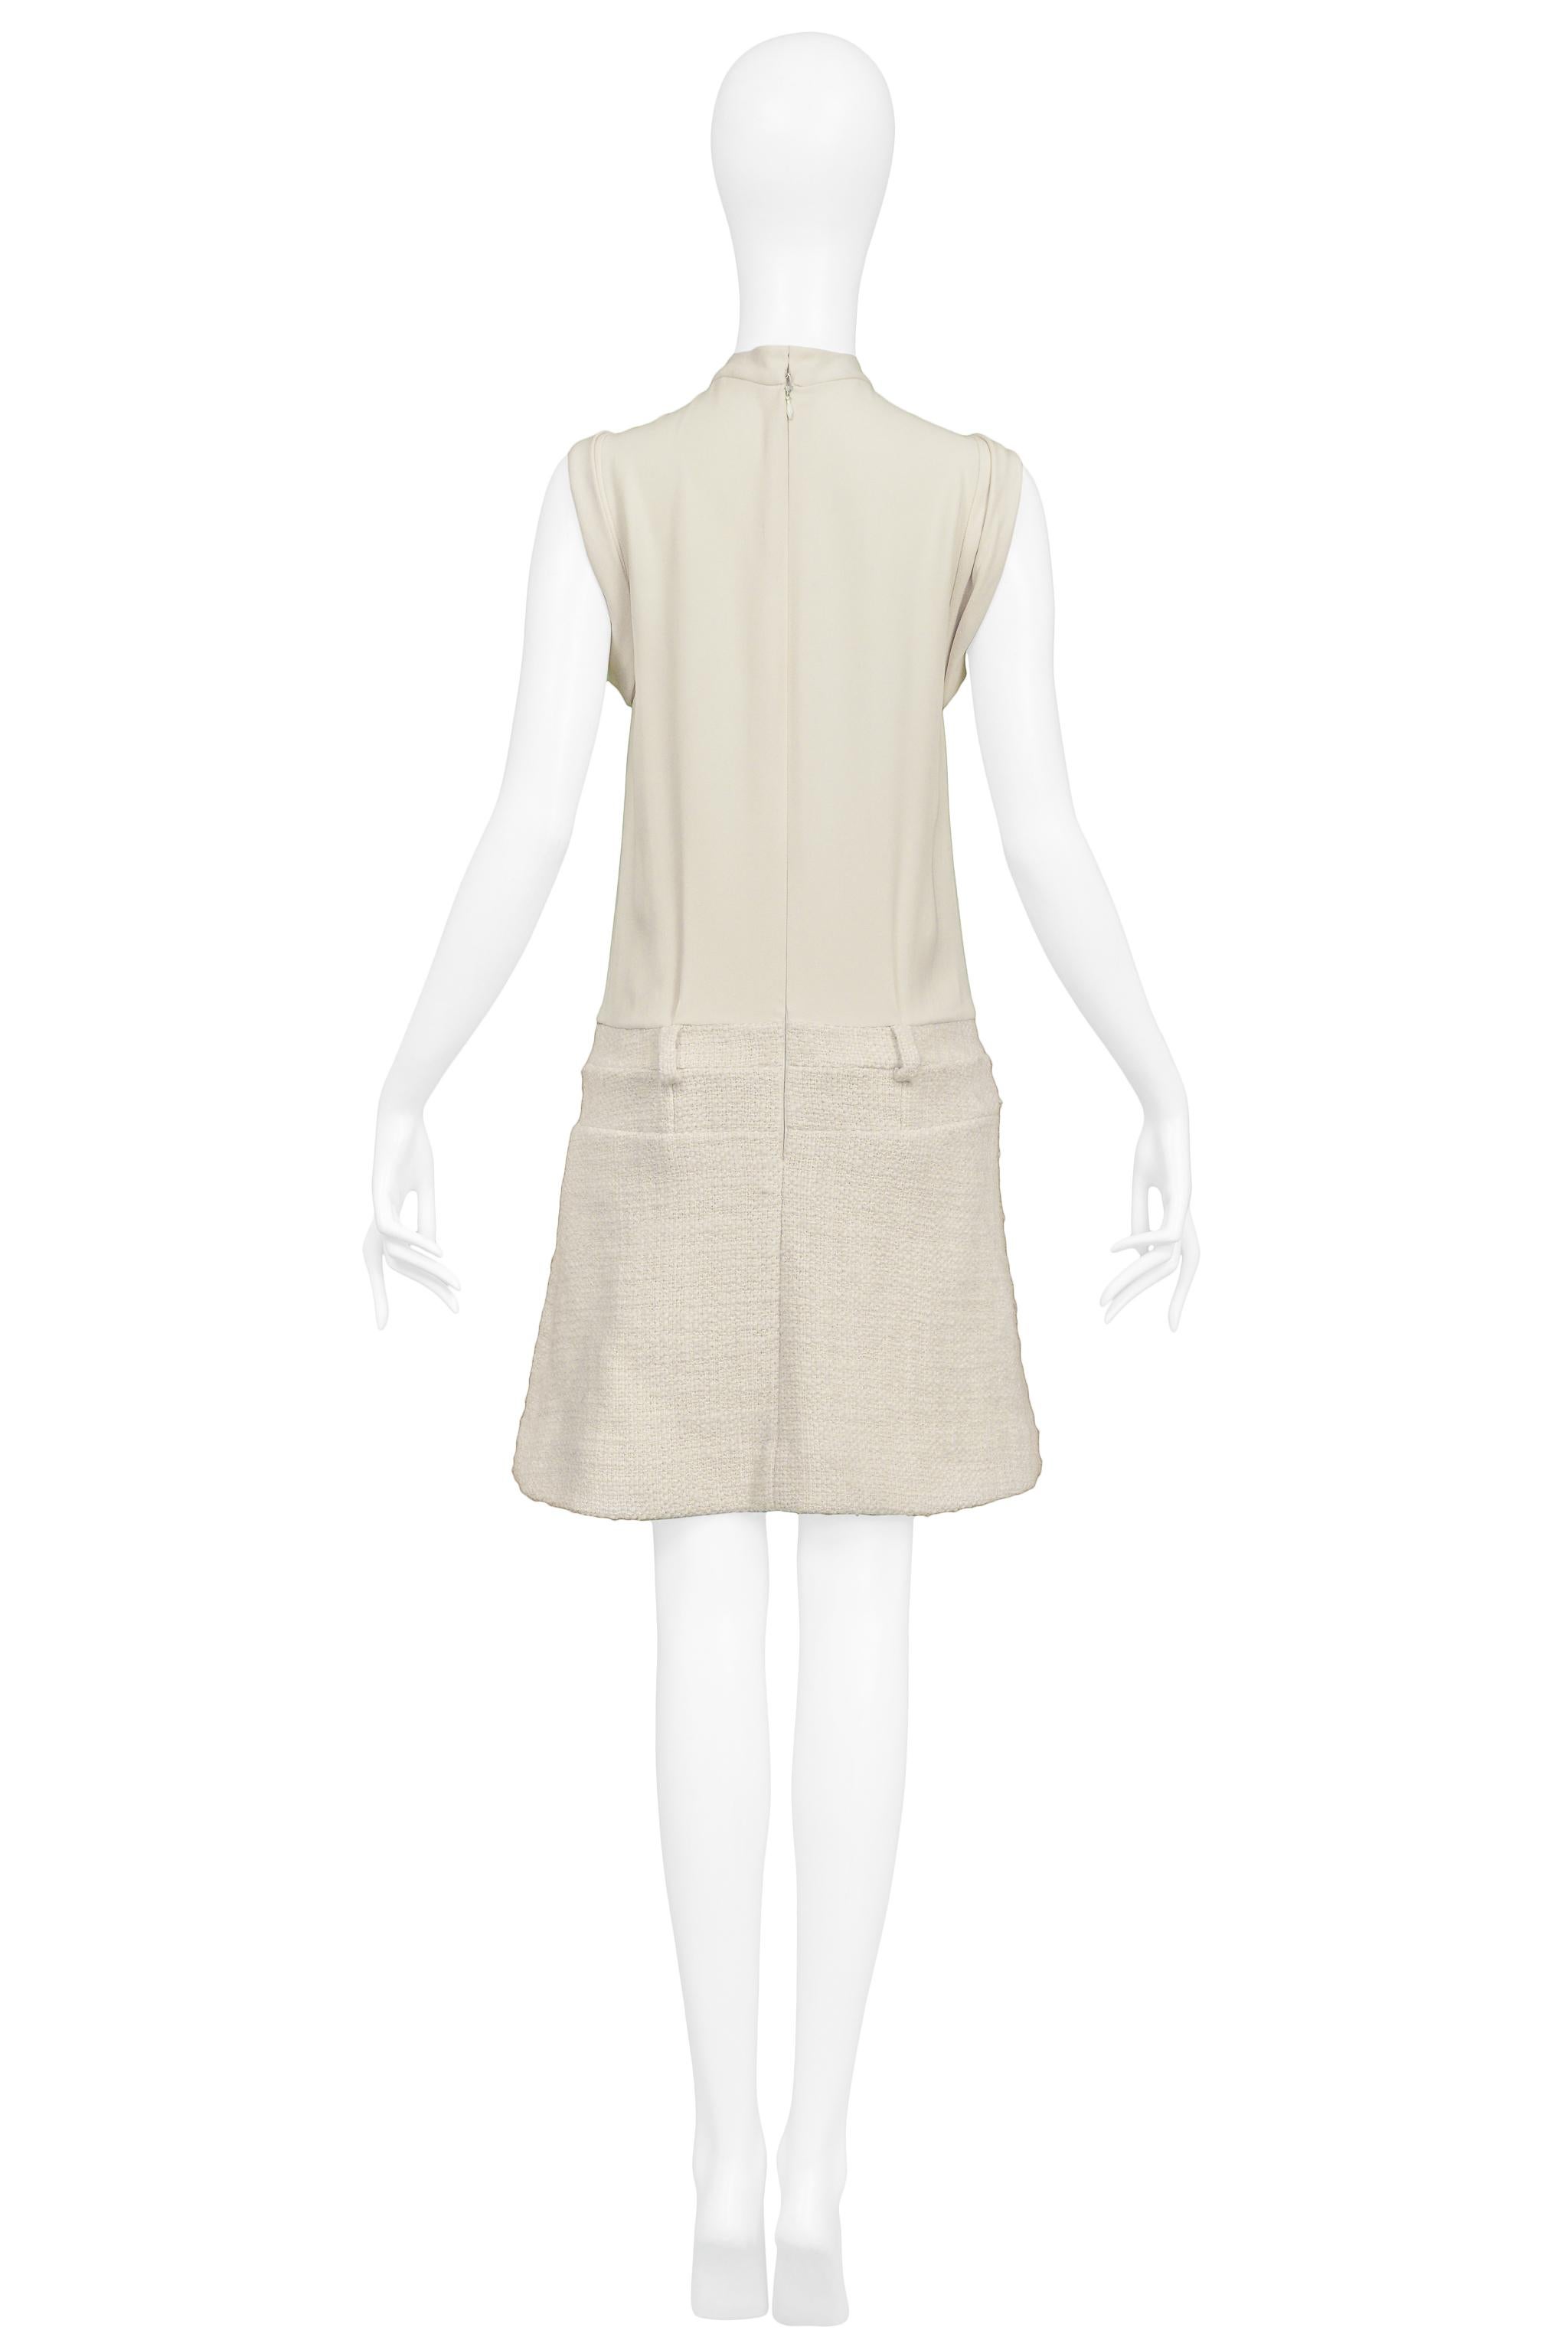 Balenciaga By Ghesquiere Off-White Box Pleat Dress 2006 For Sale 2